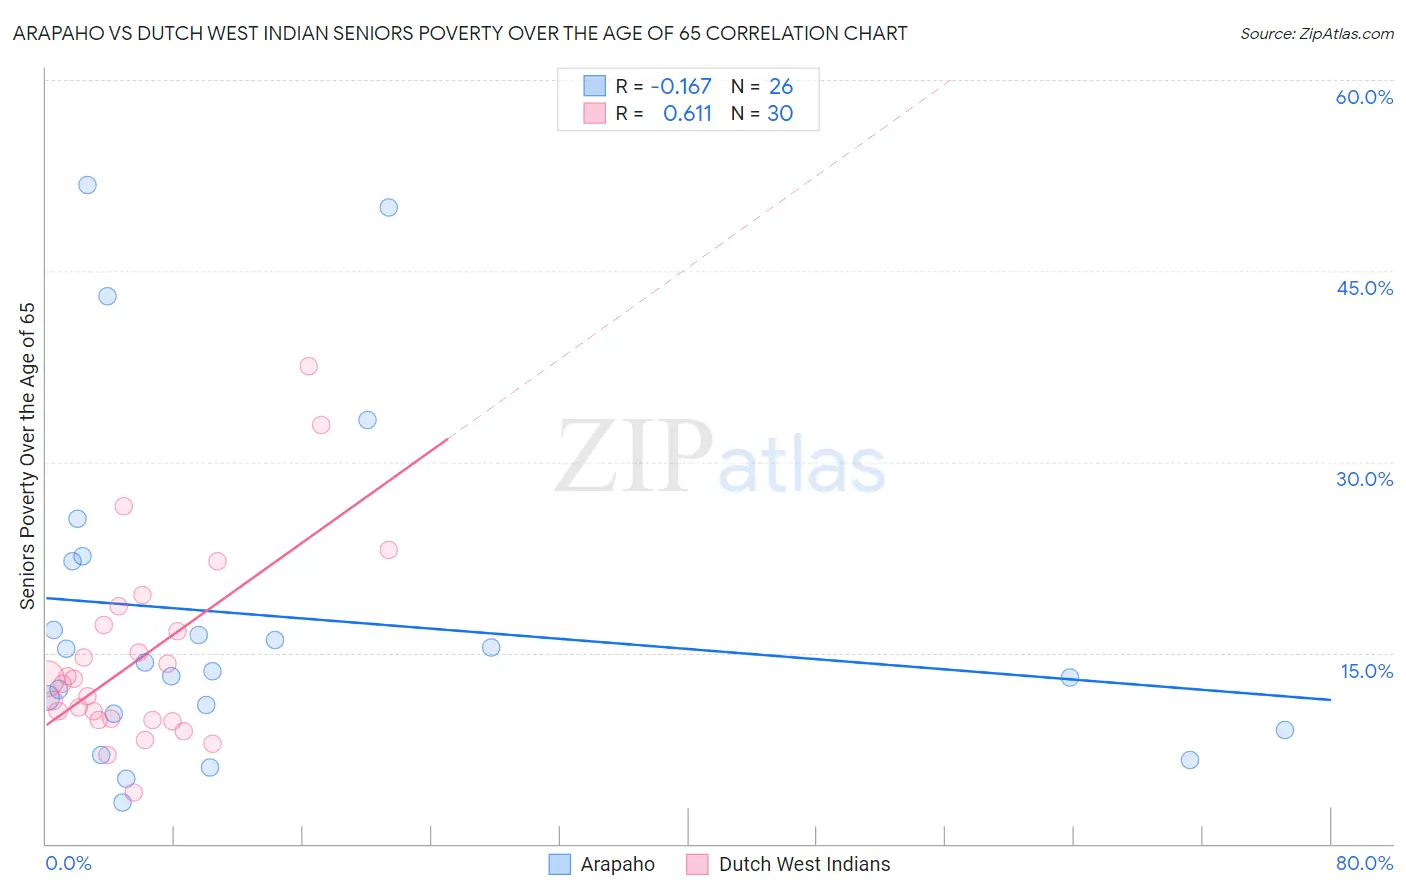 Arapaho vs Dutch West Indian Seniors Poverty Over the Age of 65